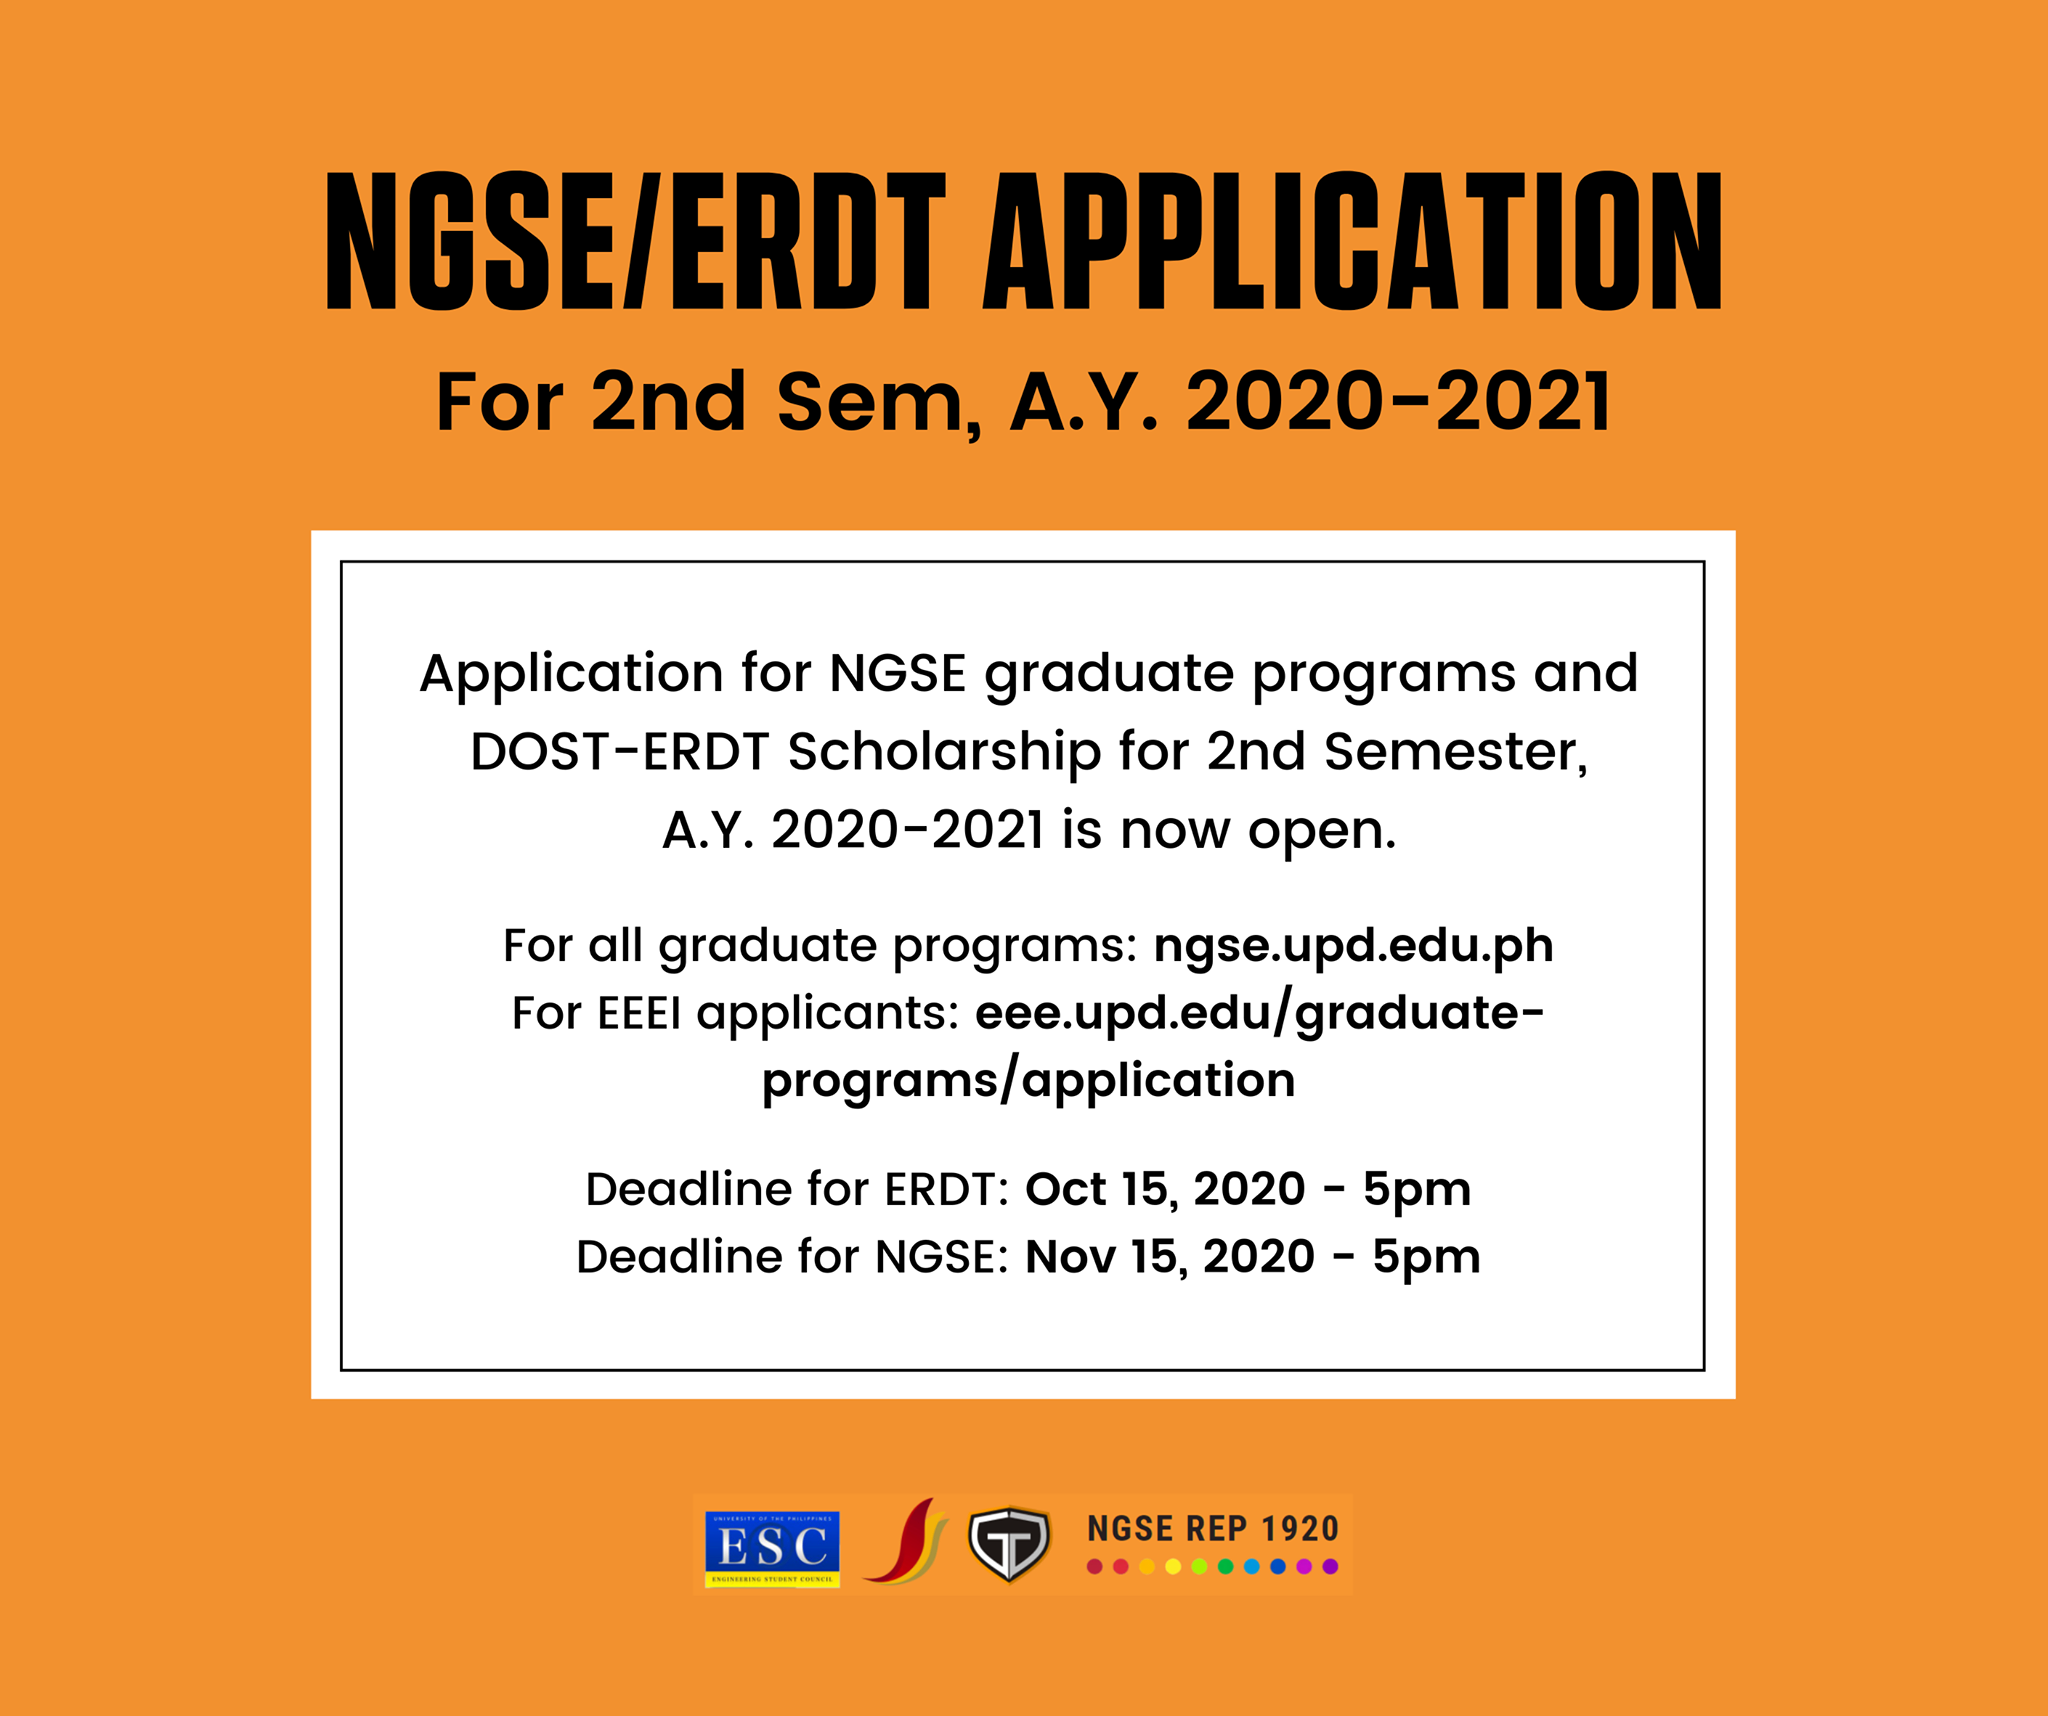 NGSE & ERDT Applications Now Open for the 2nd Semester